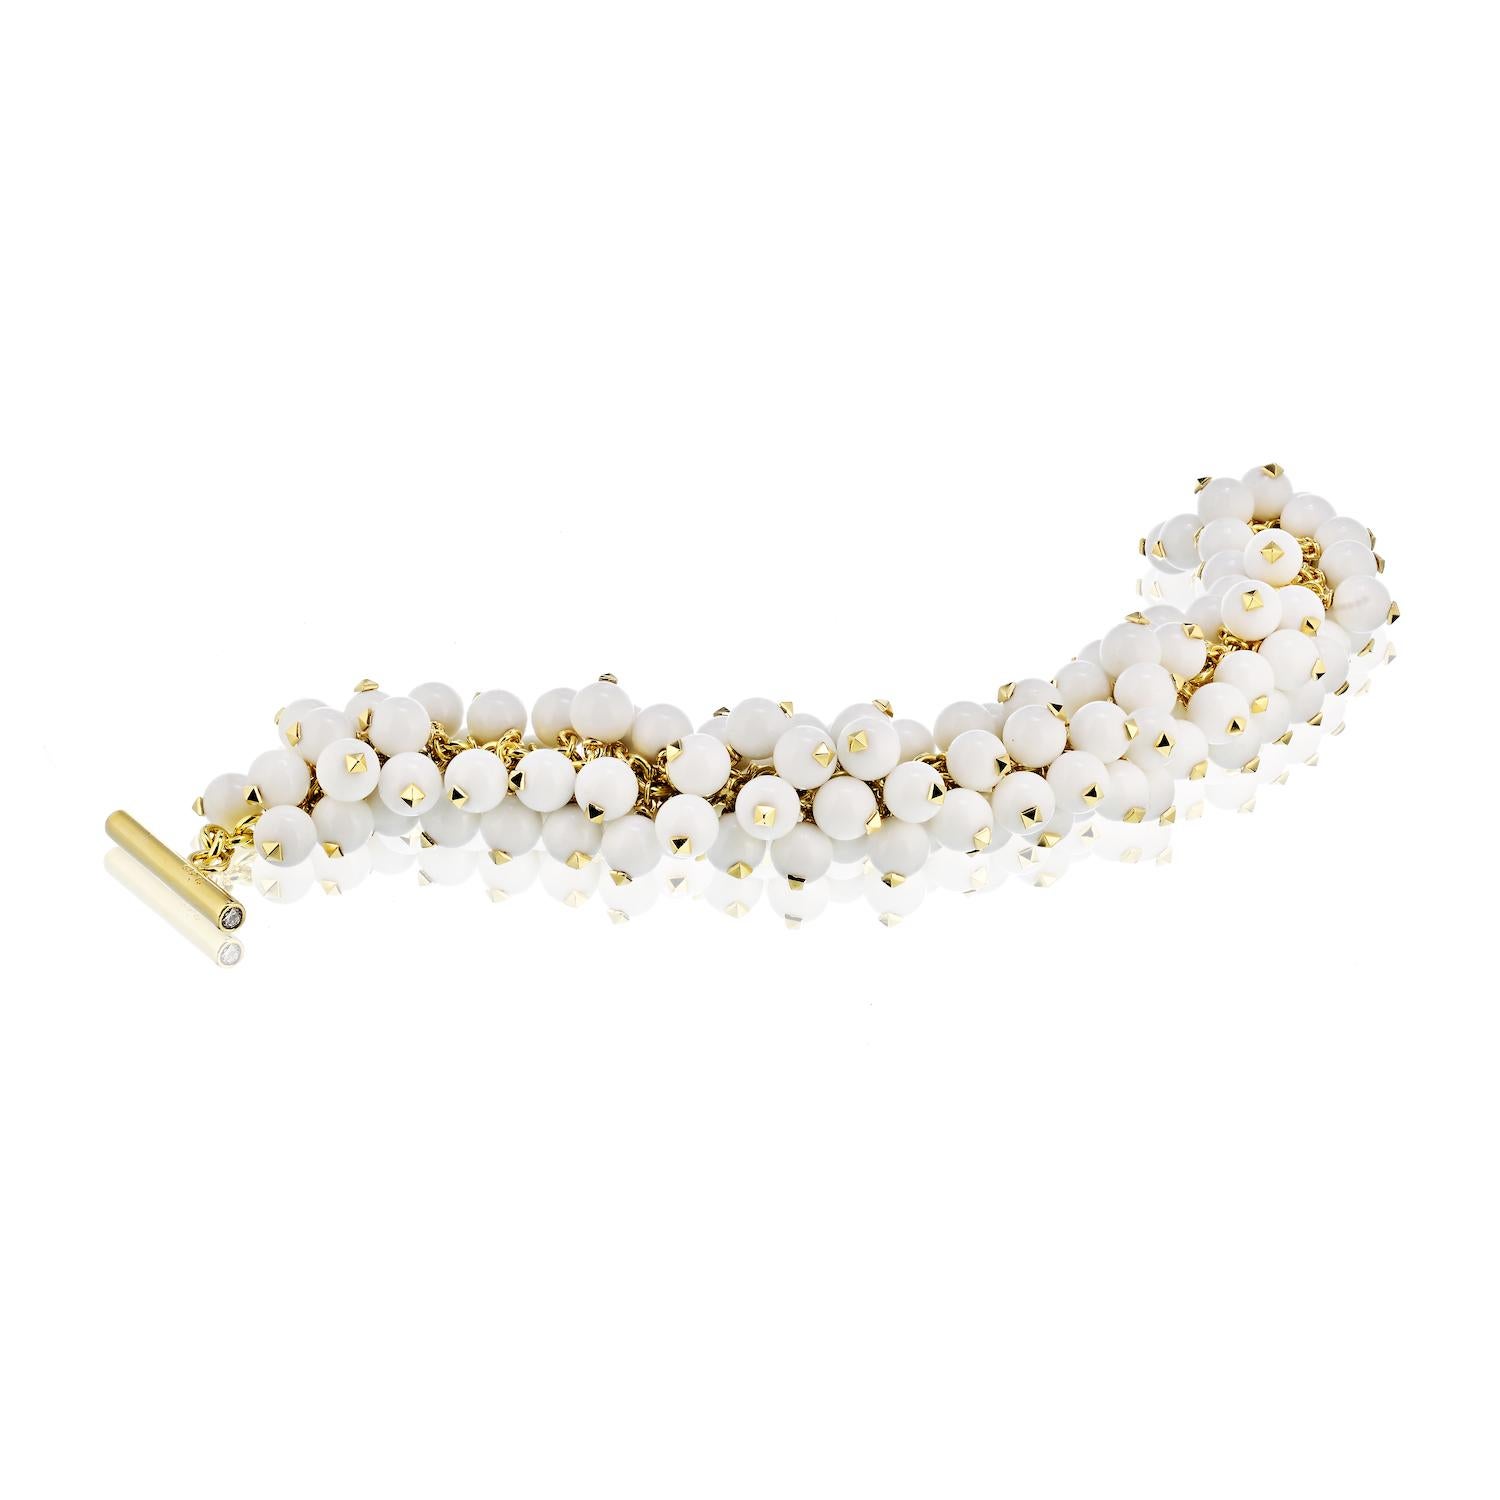 The bracelet is composed of articulated white agate beads, completed by a toggle clasp accented by full-cut diamonds weighing a total of approximately 0.10 carat, set in 18k gold, marked Aletto Brothers. Gross weight 85.60 grams.
Dimensions: 7-1/2